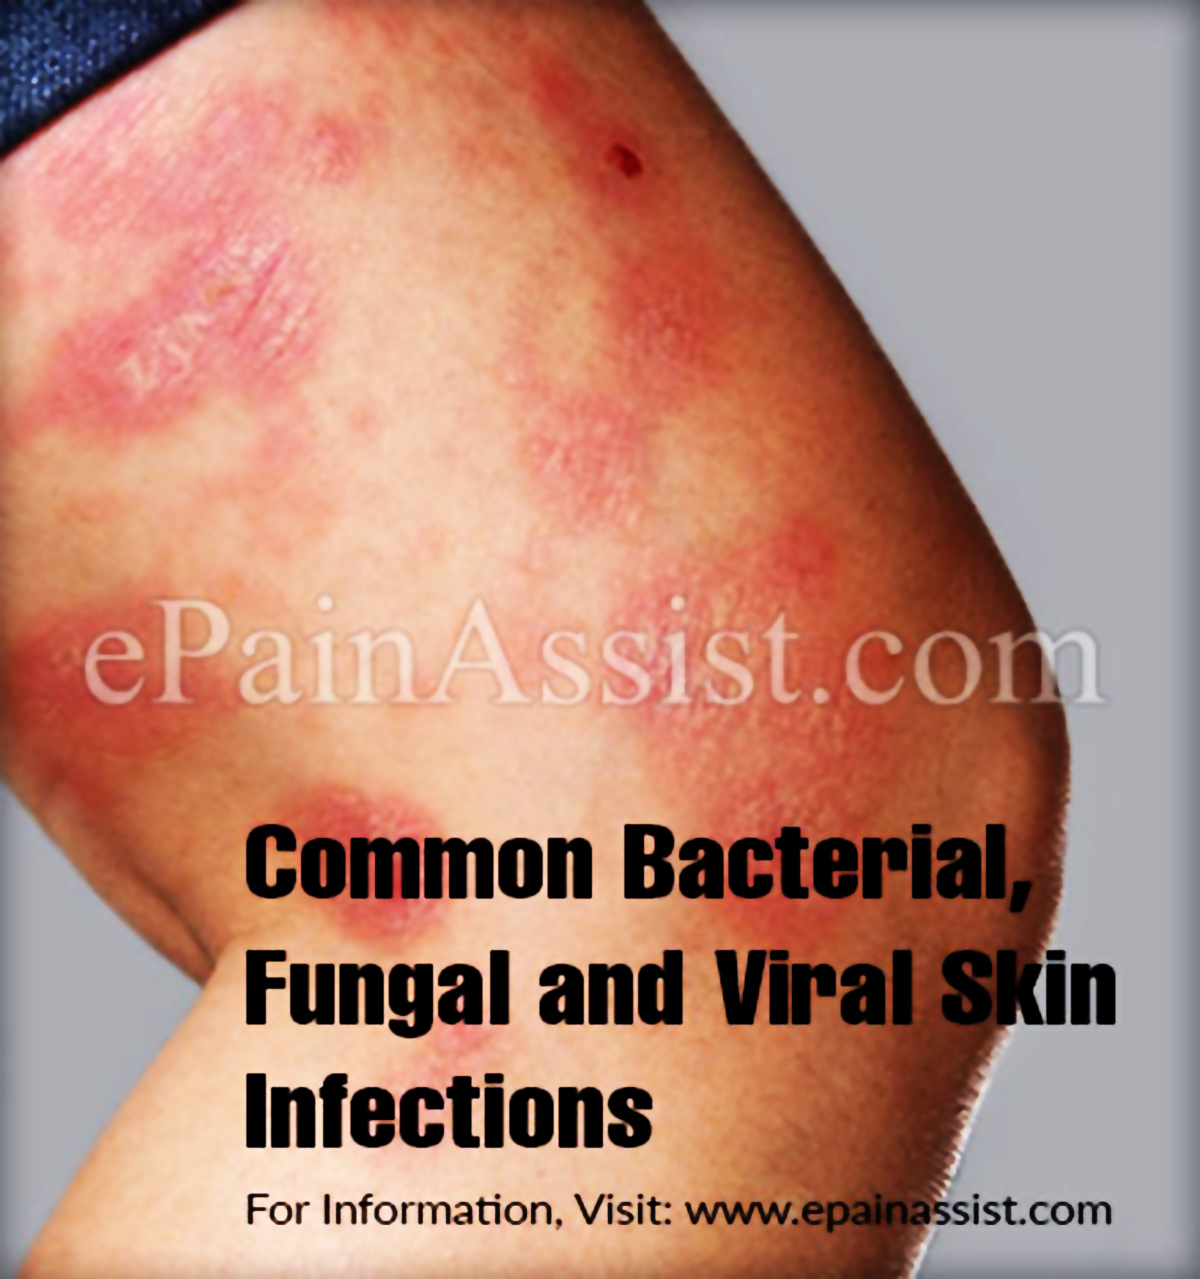 Common Bacterial, Fungal and Viral Skin Infections